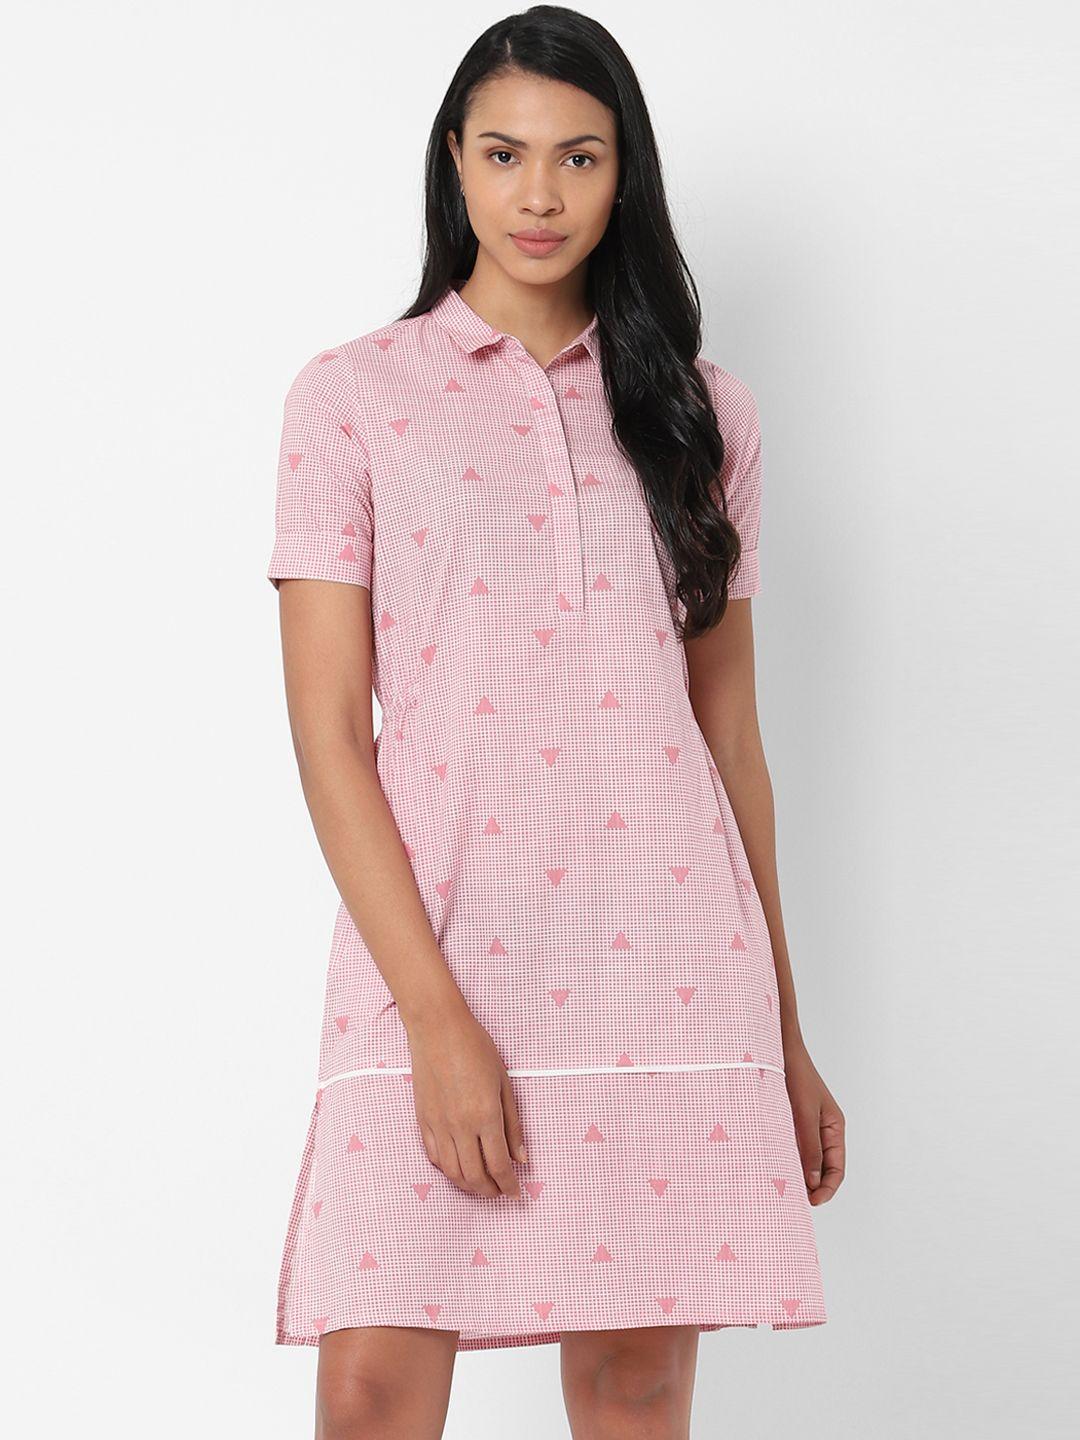 allen solly woman pink & white checked a-line dress